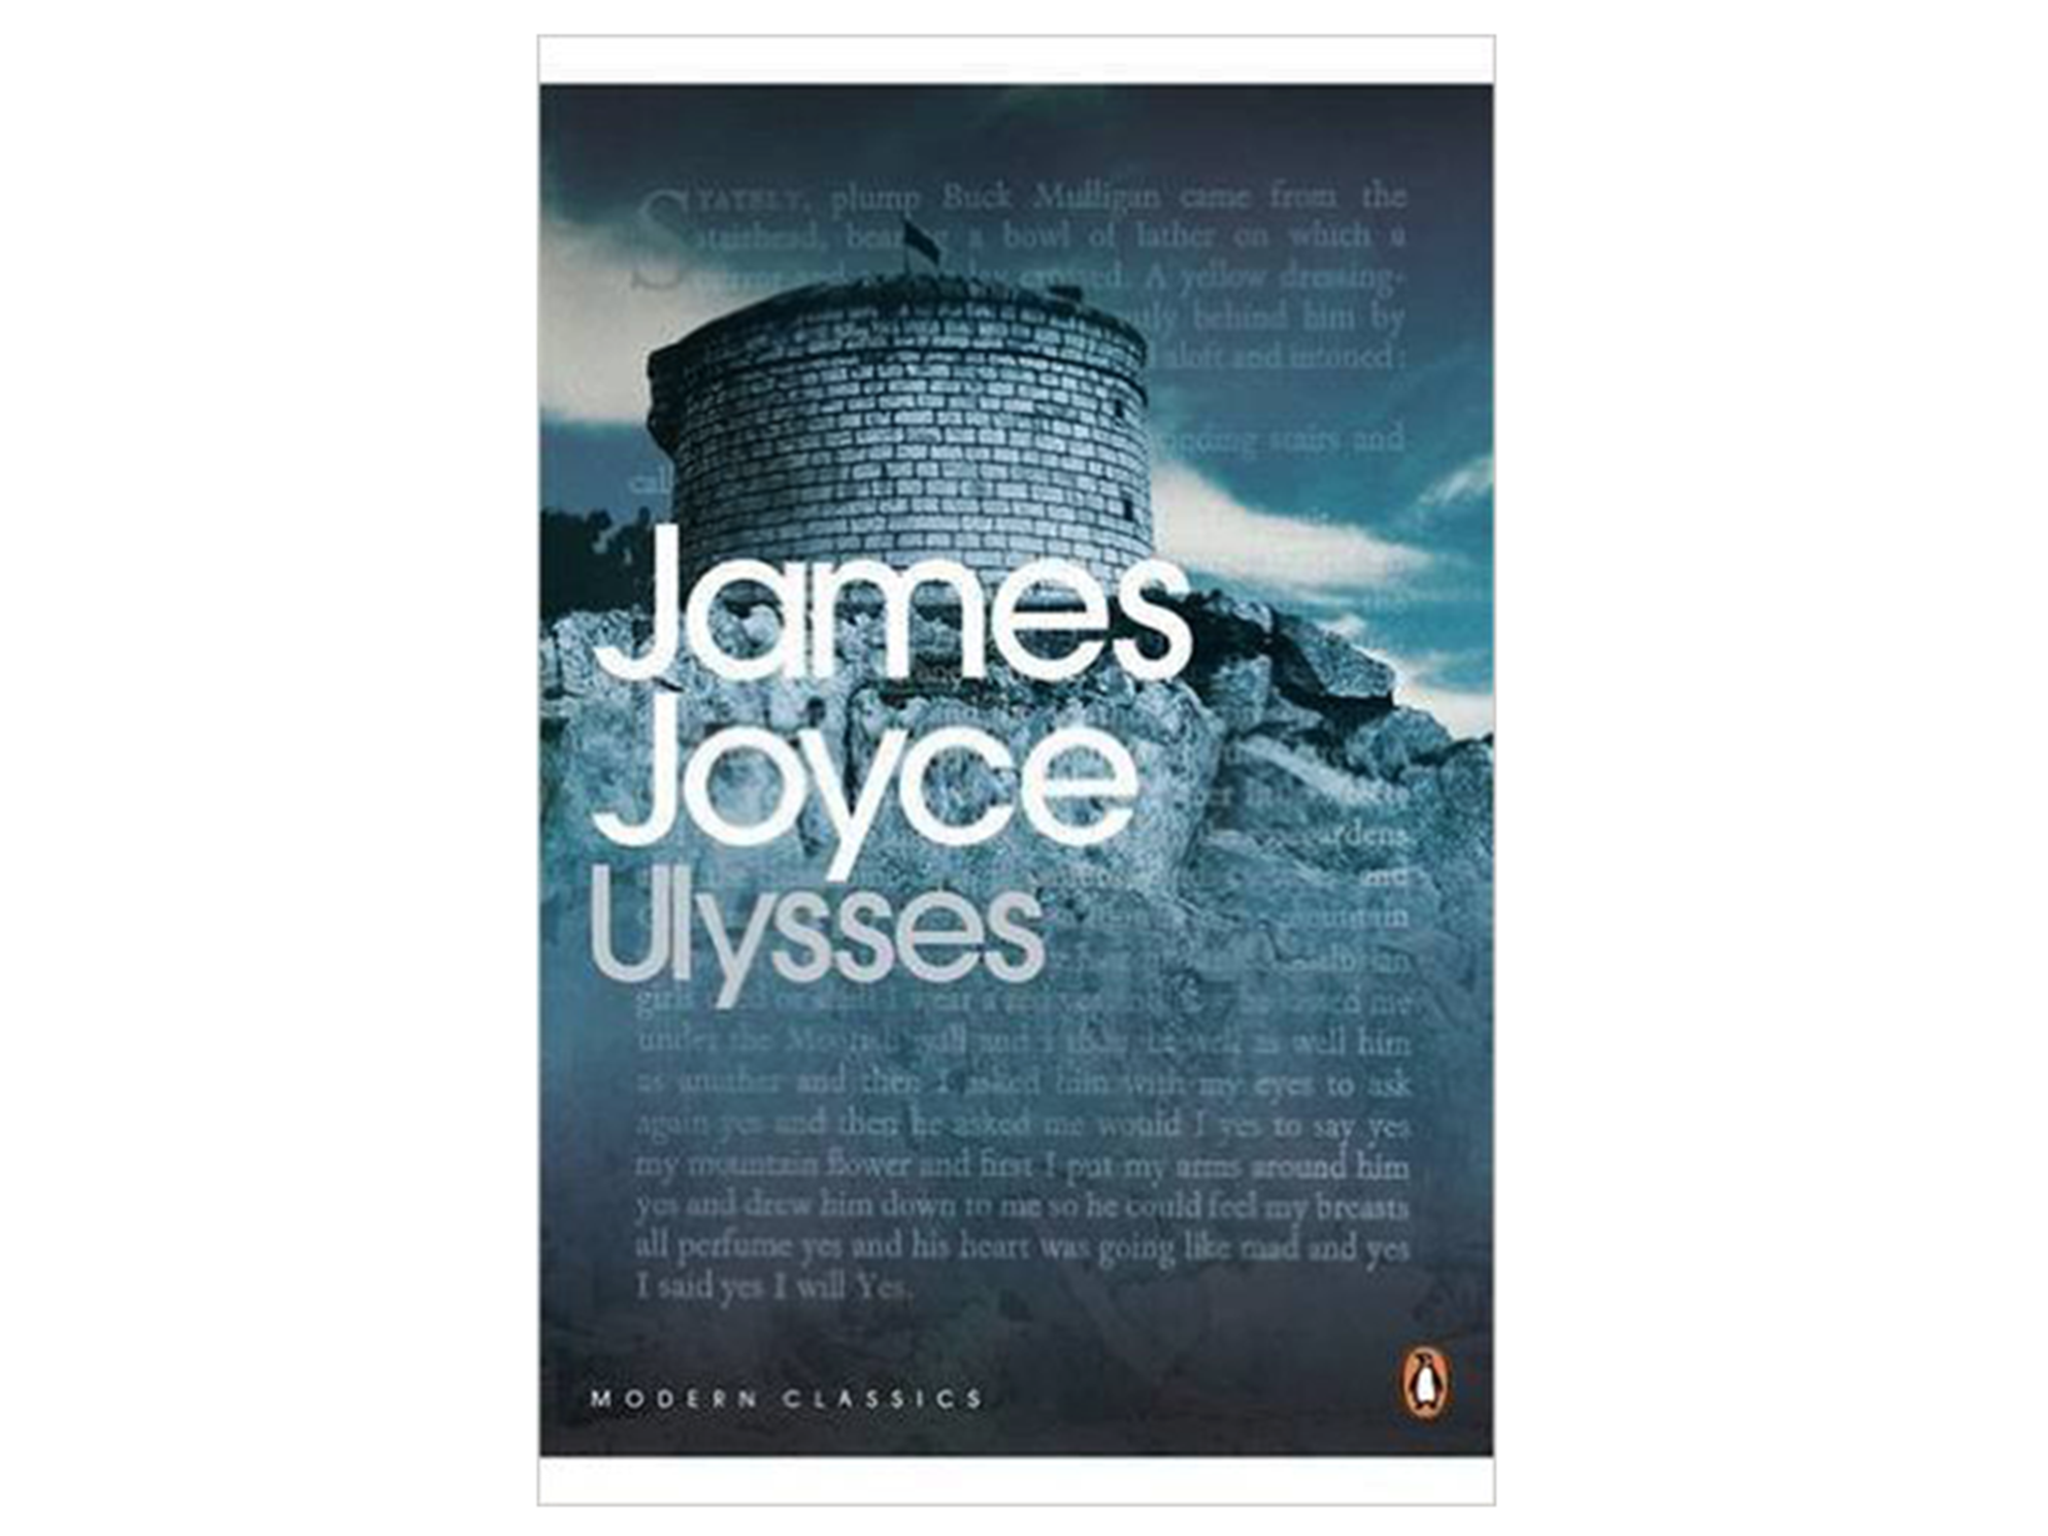 ‘Ulysses’ by James Joyce, published by Penguin  banned books week